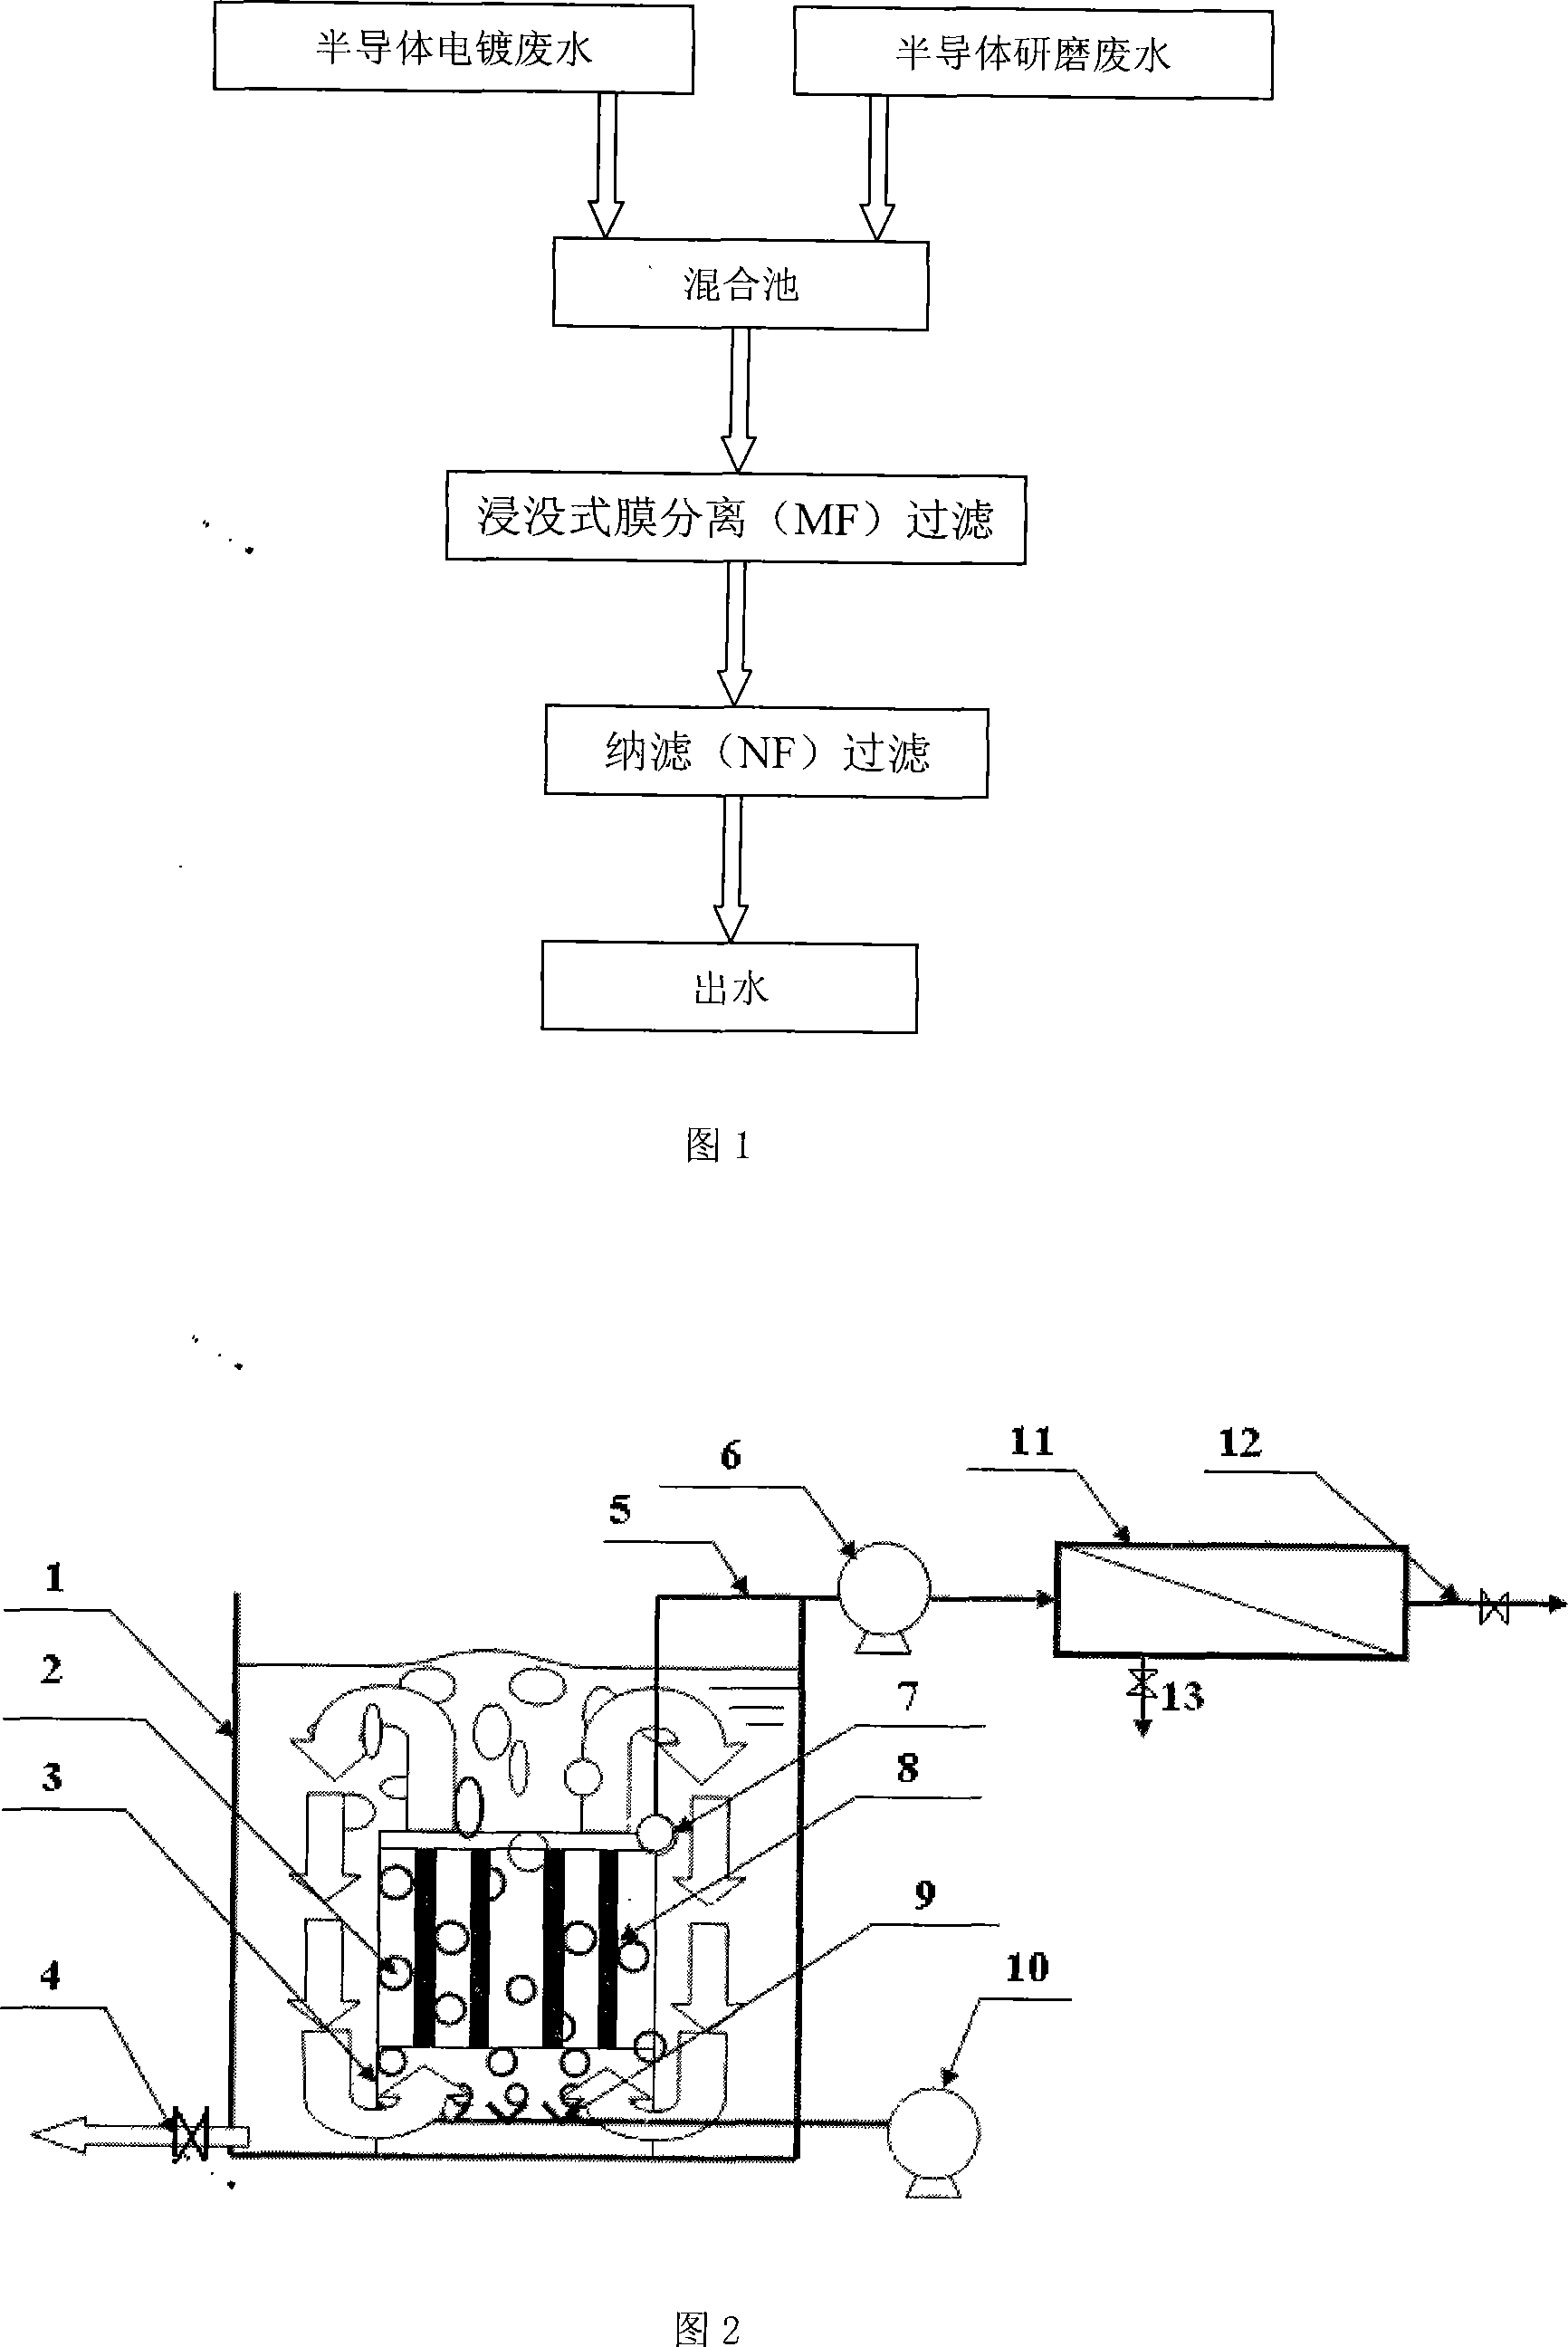 Method of processing semi-conductor industrial waste water